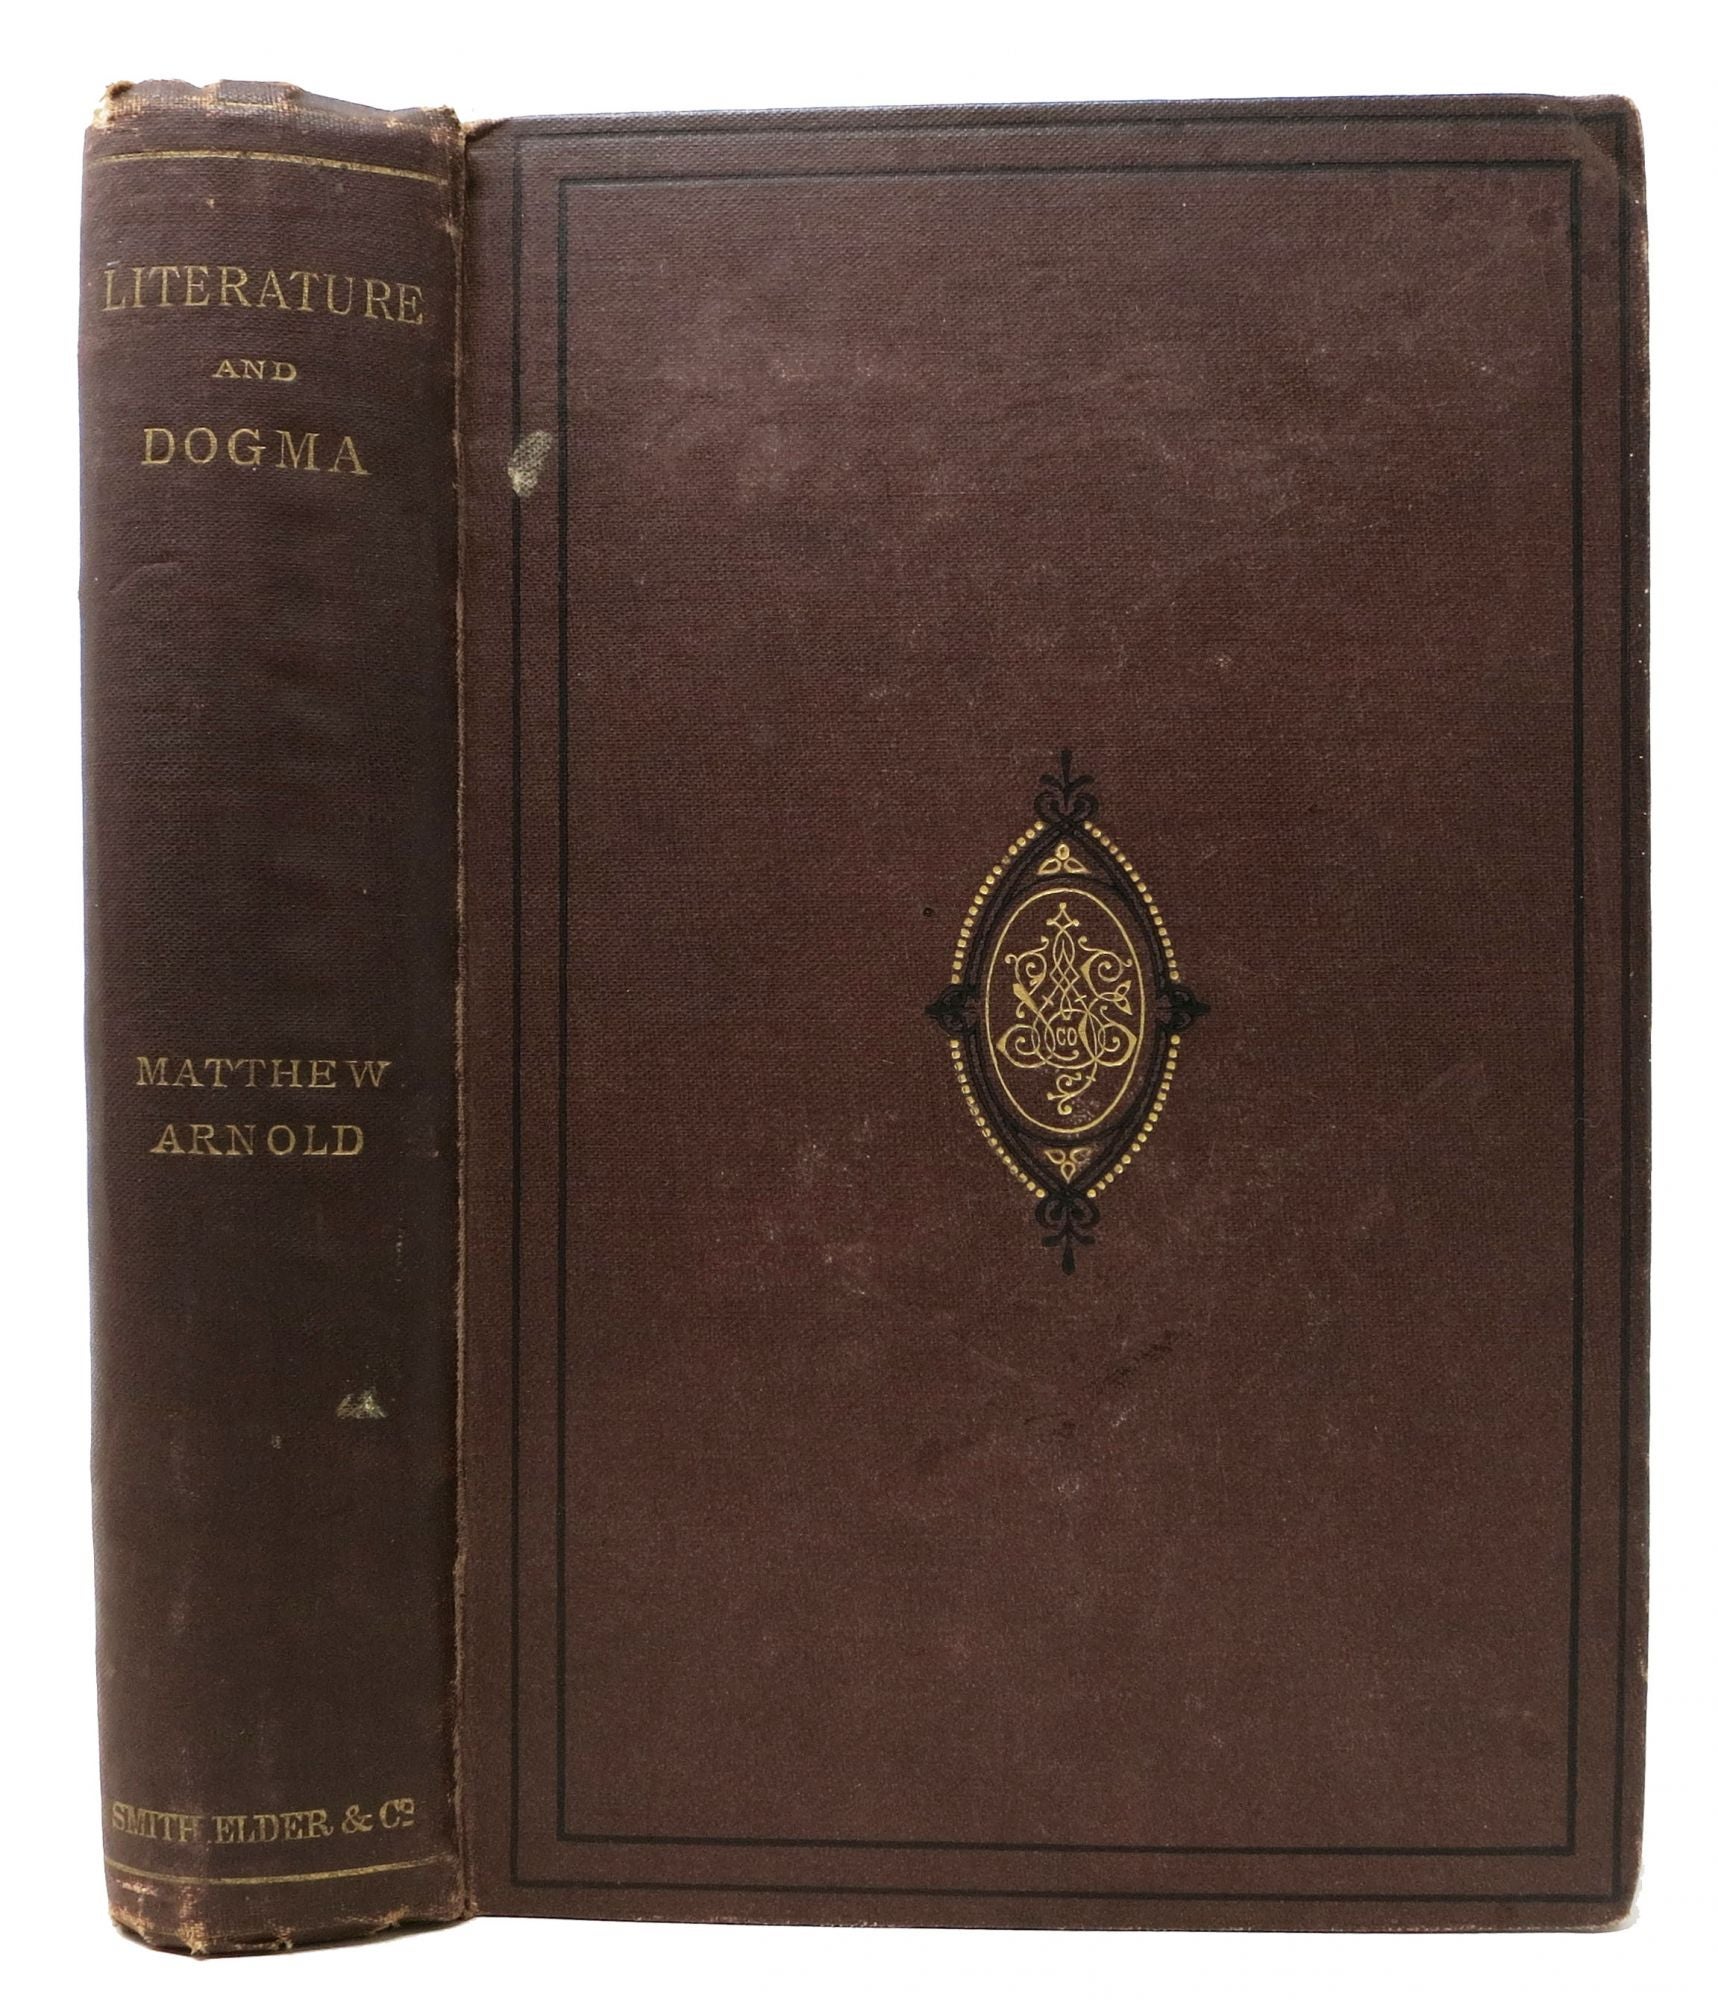 Arnold, Matthew [1822 - 1888] - LITERATURE & DOGMA. An Essay Towards a Better Apprehension of the Bible